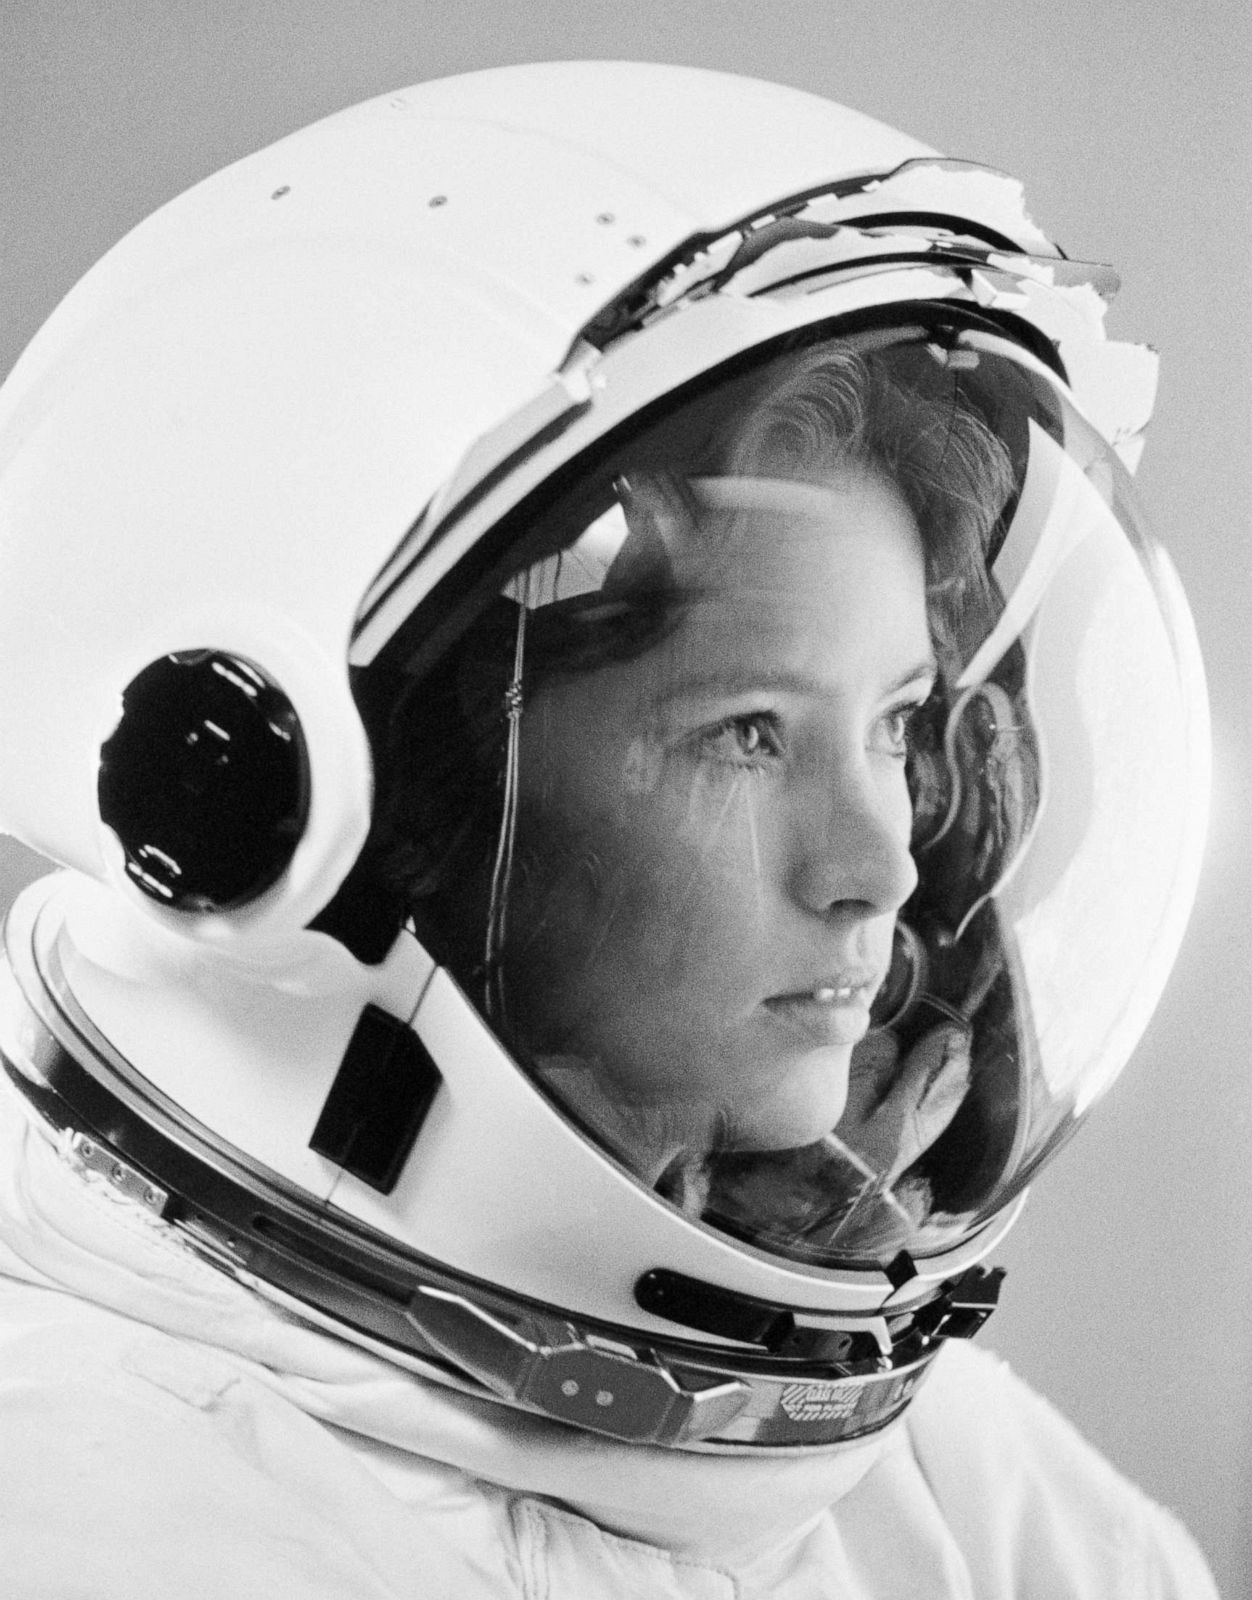 Anna Lee Fisher was the first mother in space. This image is iconic, and to me represents the best of humanity.